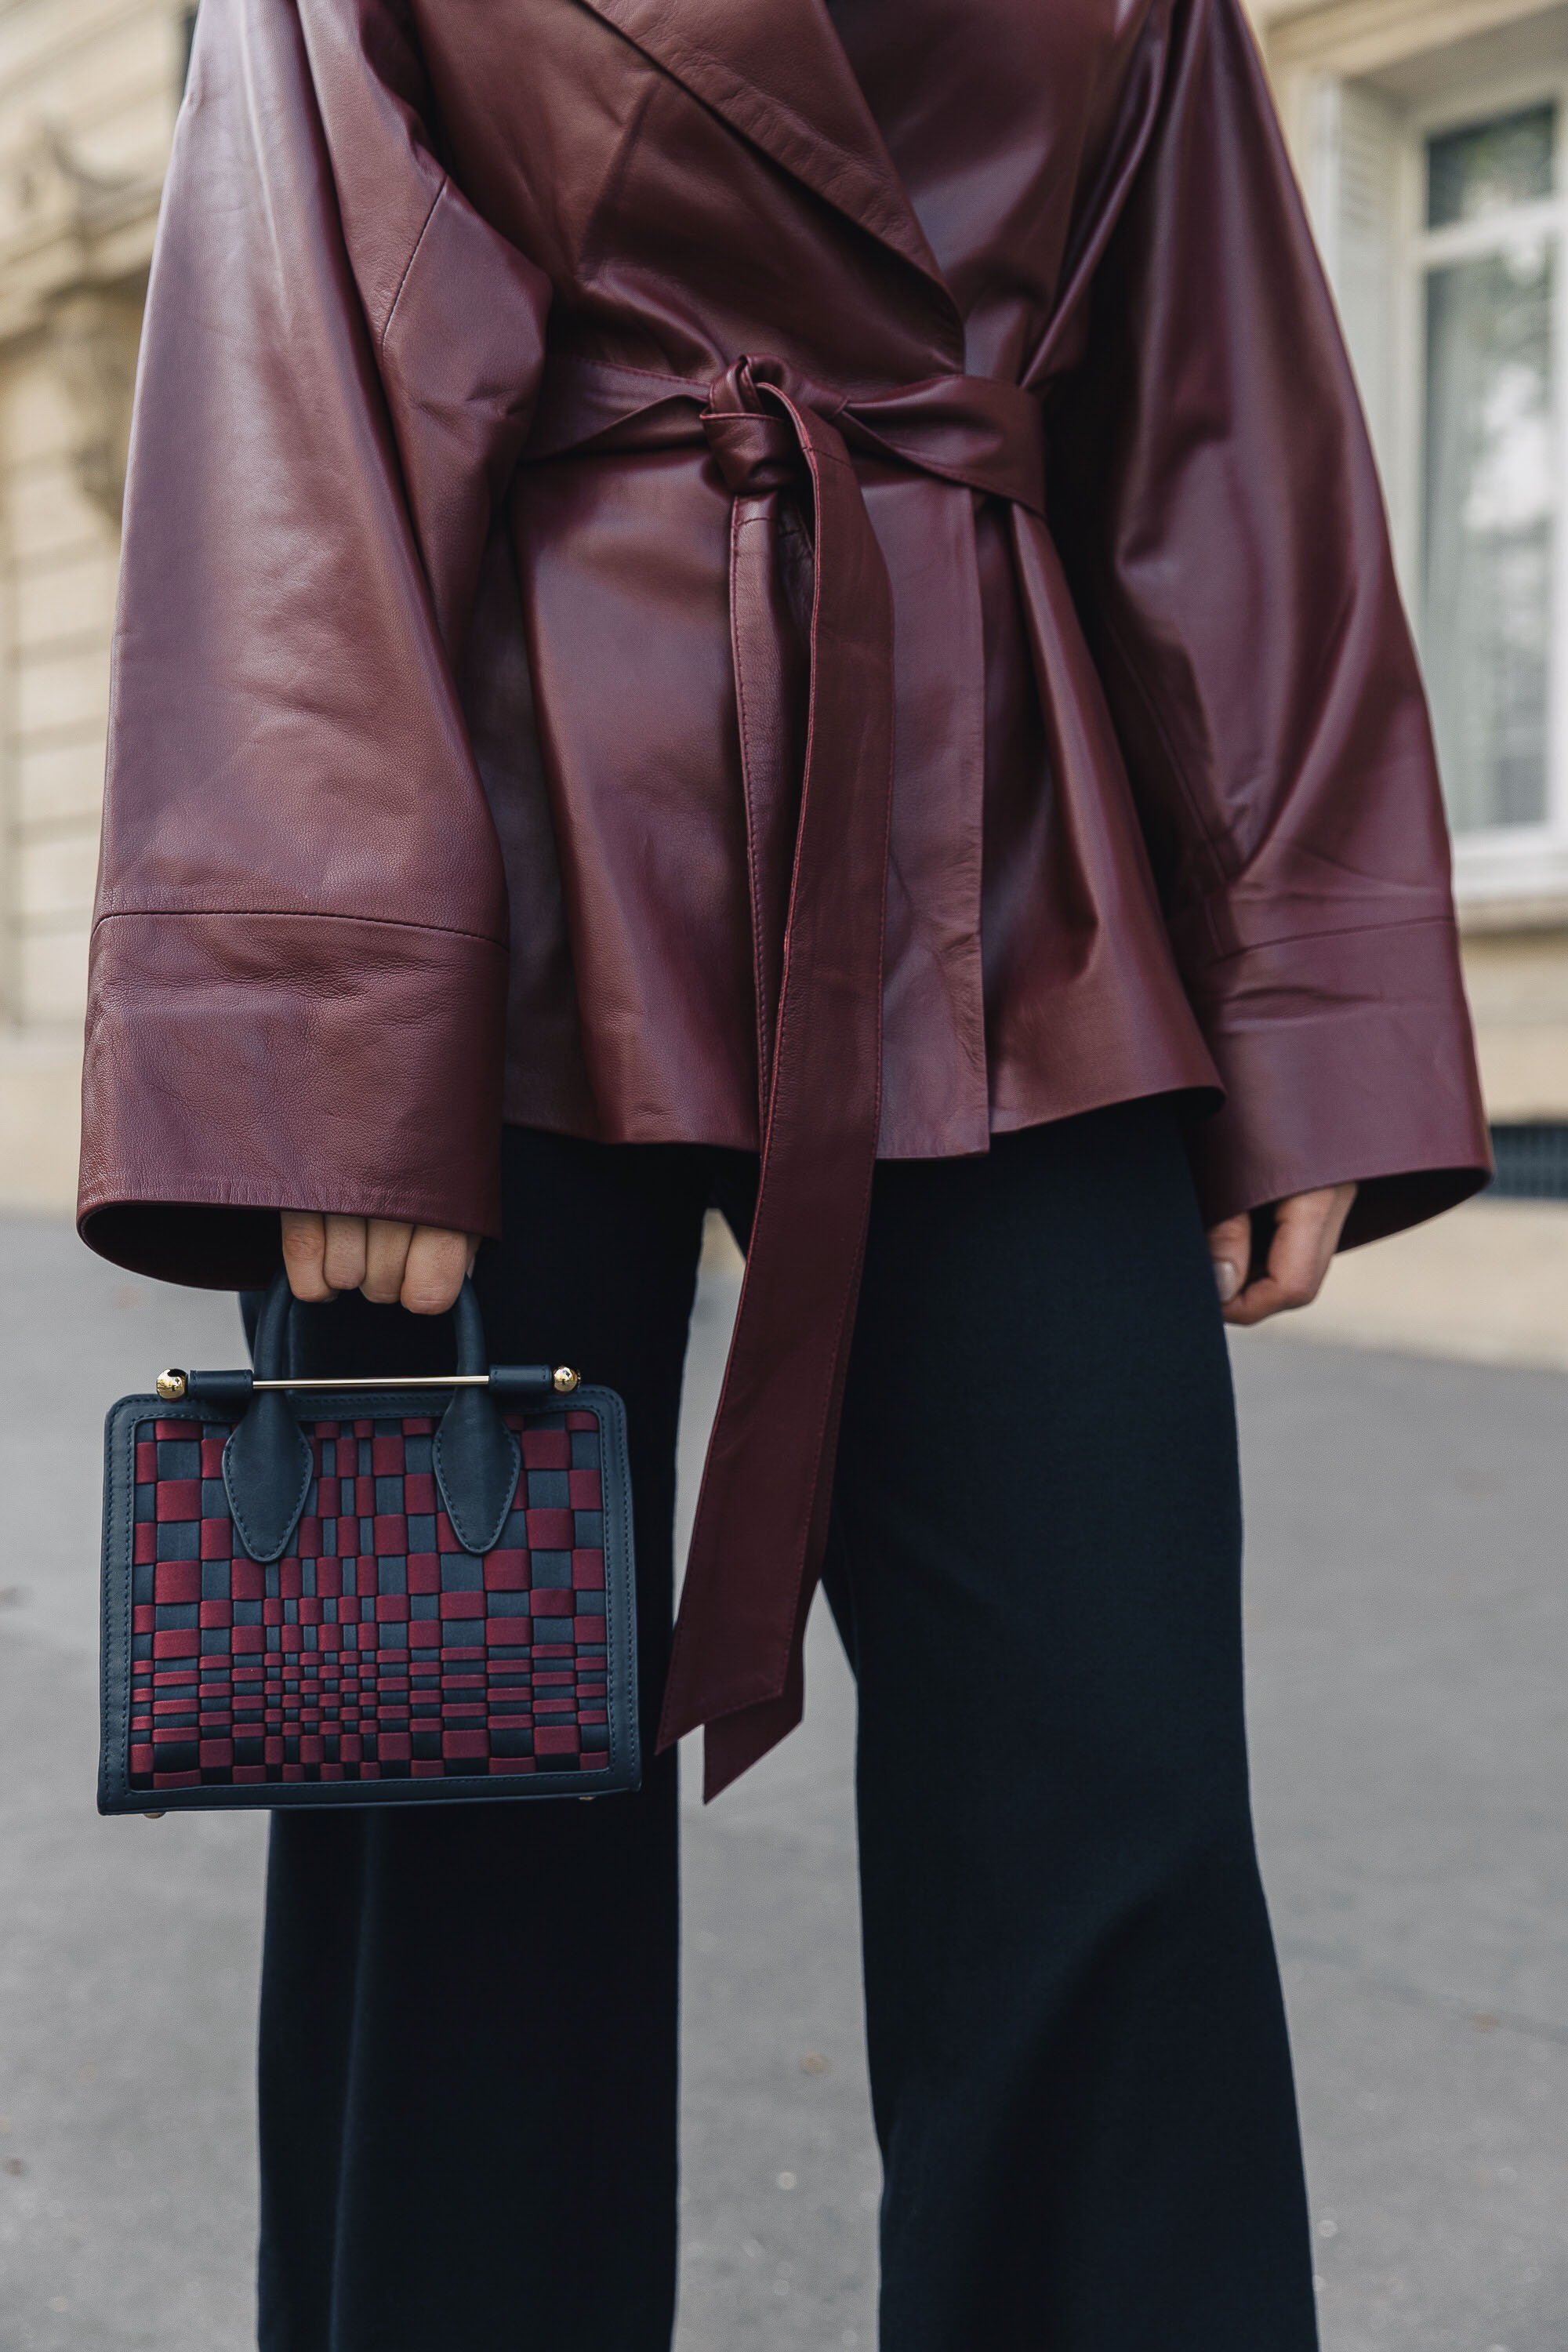 PFW SS20 Street Style Fall 2019 Paris Fashion Week Julia Comil wearing bag strathberry, jacket Nour Hammour, shoes Yuul Yie